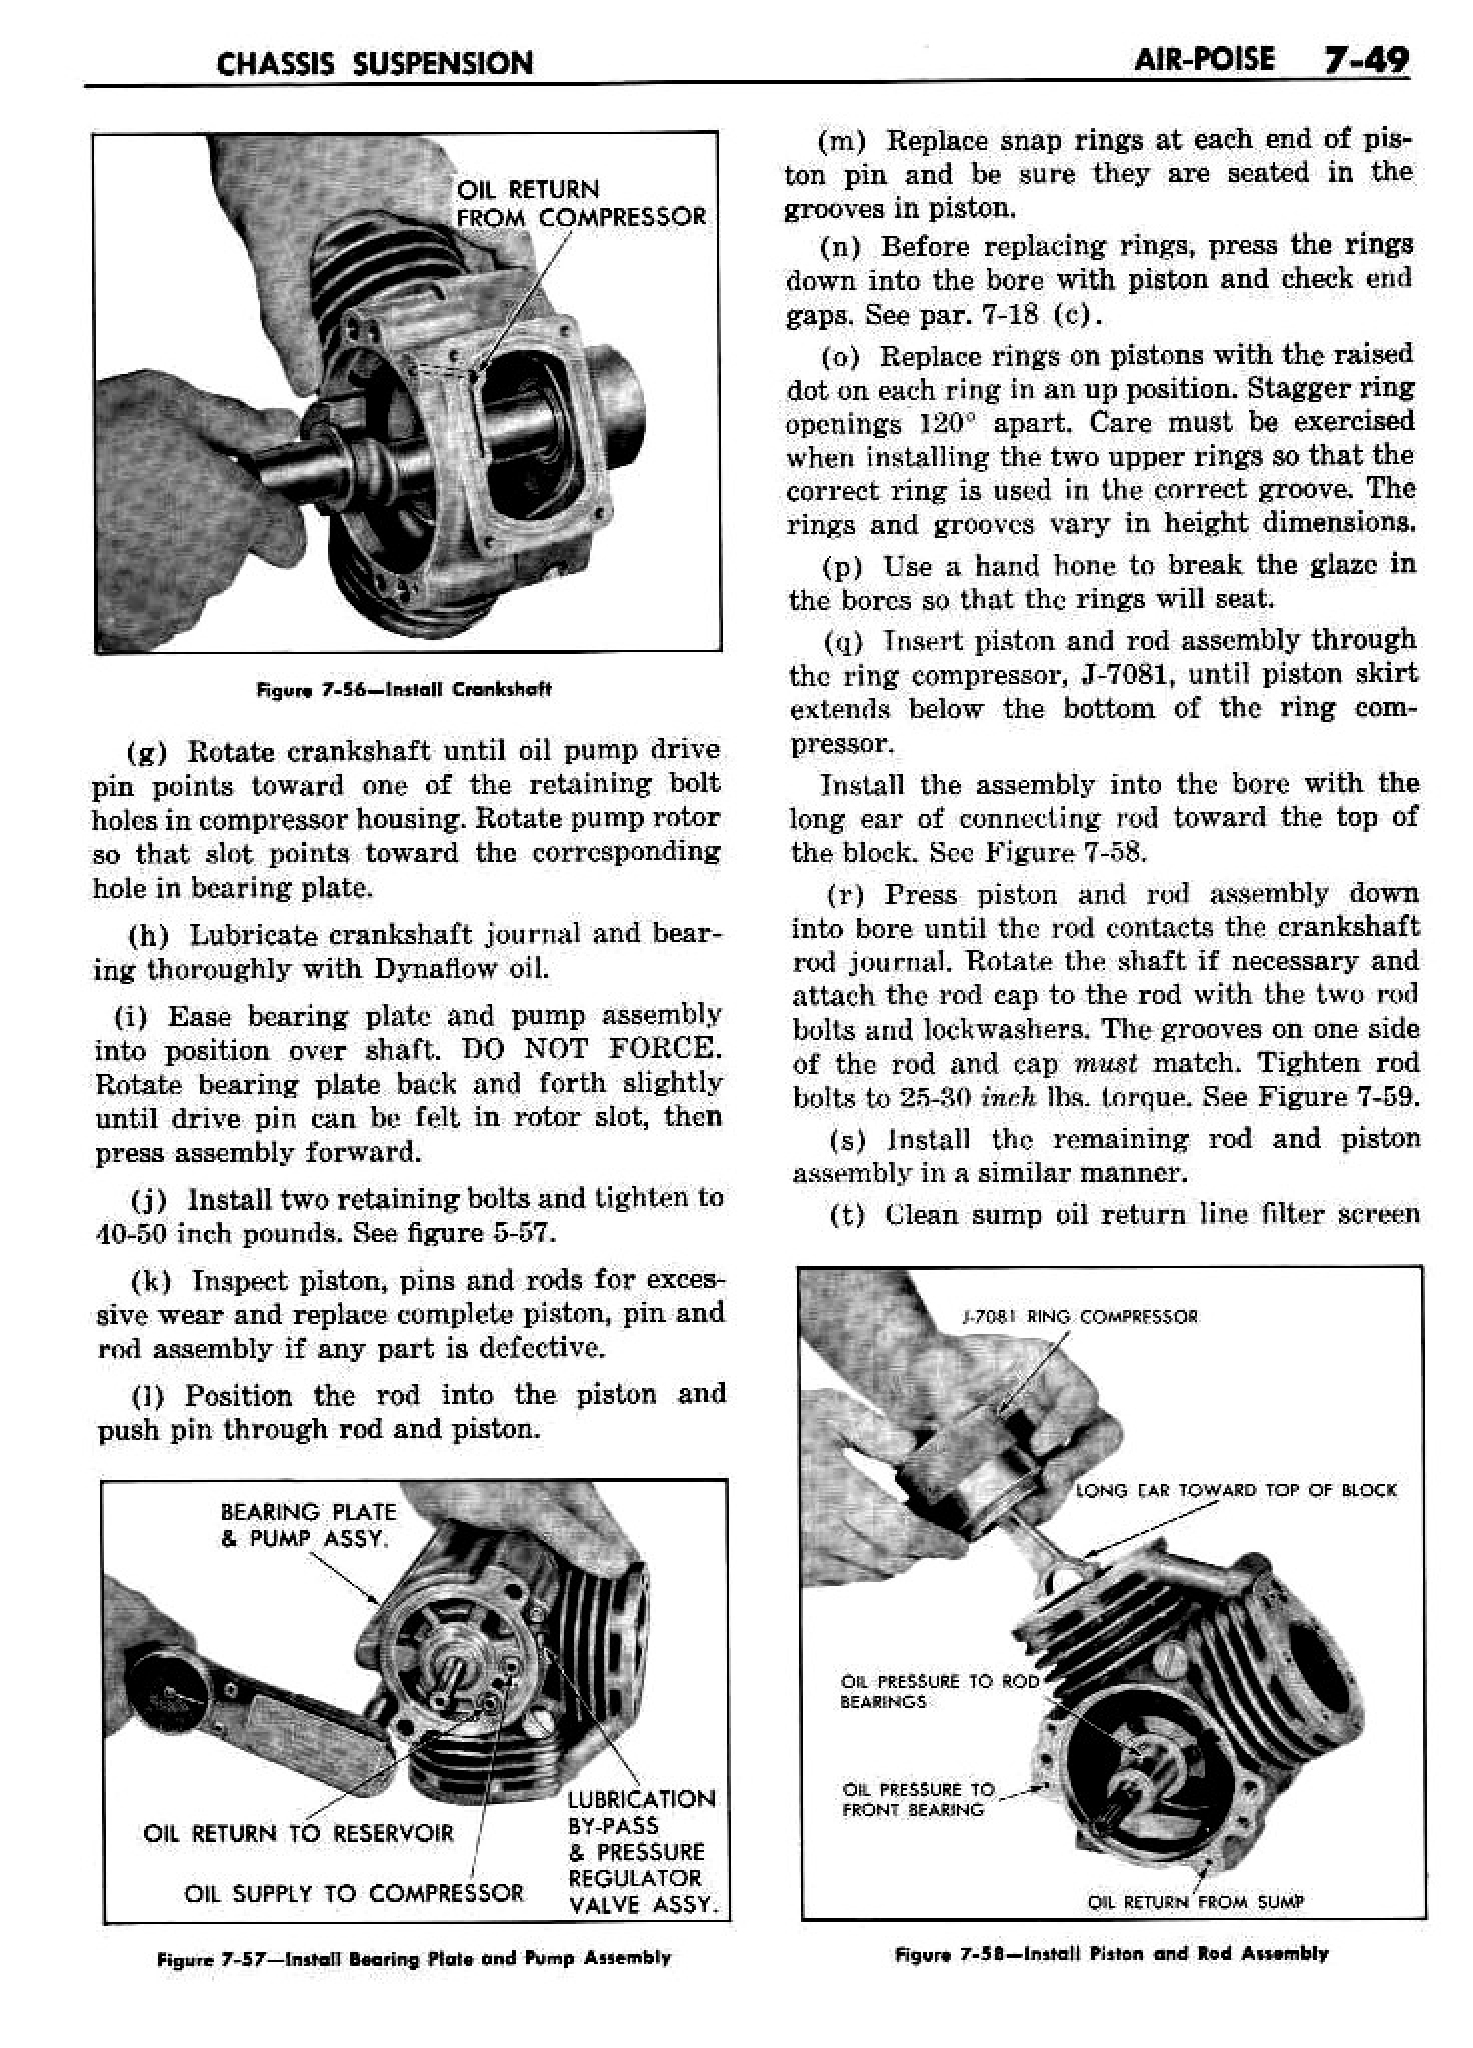 n_08 1958 Buick Shop Manual - Chassis Suspension_49.jpg